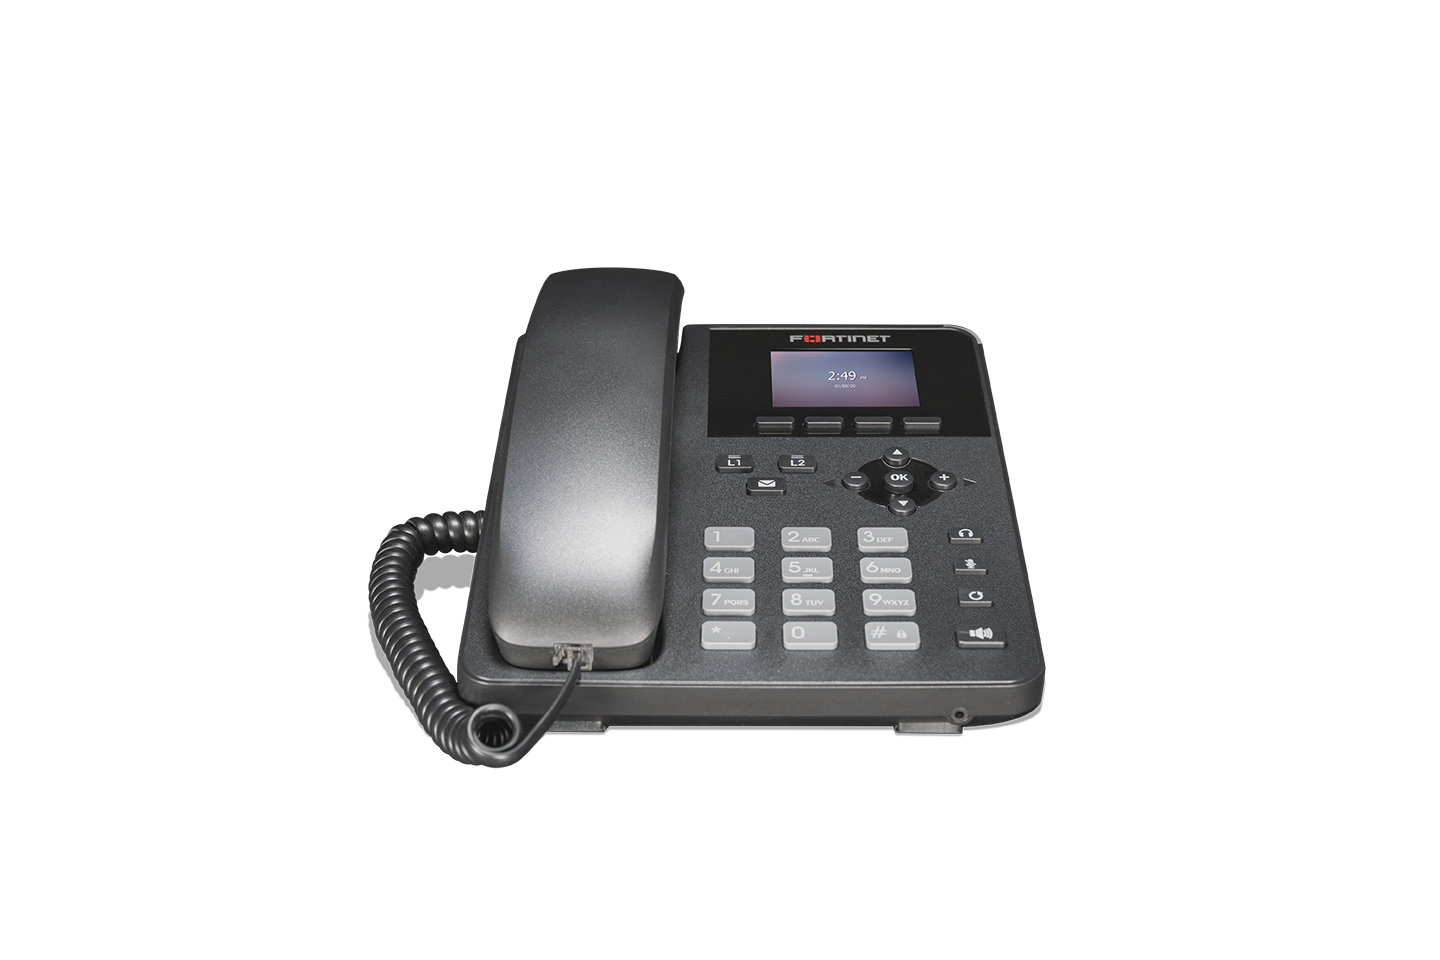 Fortinet FON 350i IP Business Office Phone W/ Stand and Handset 